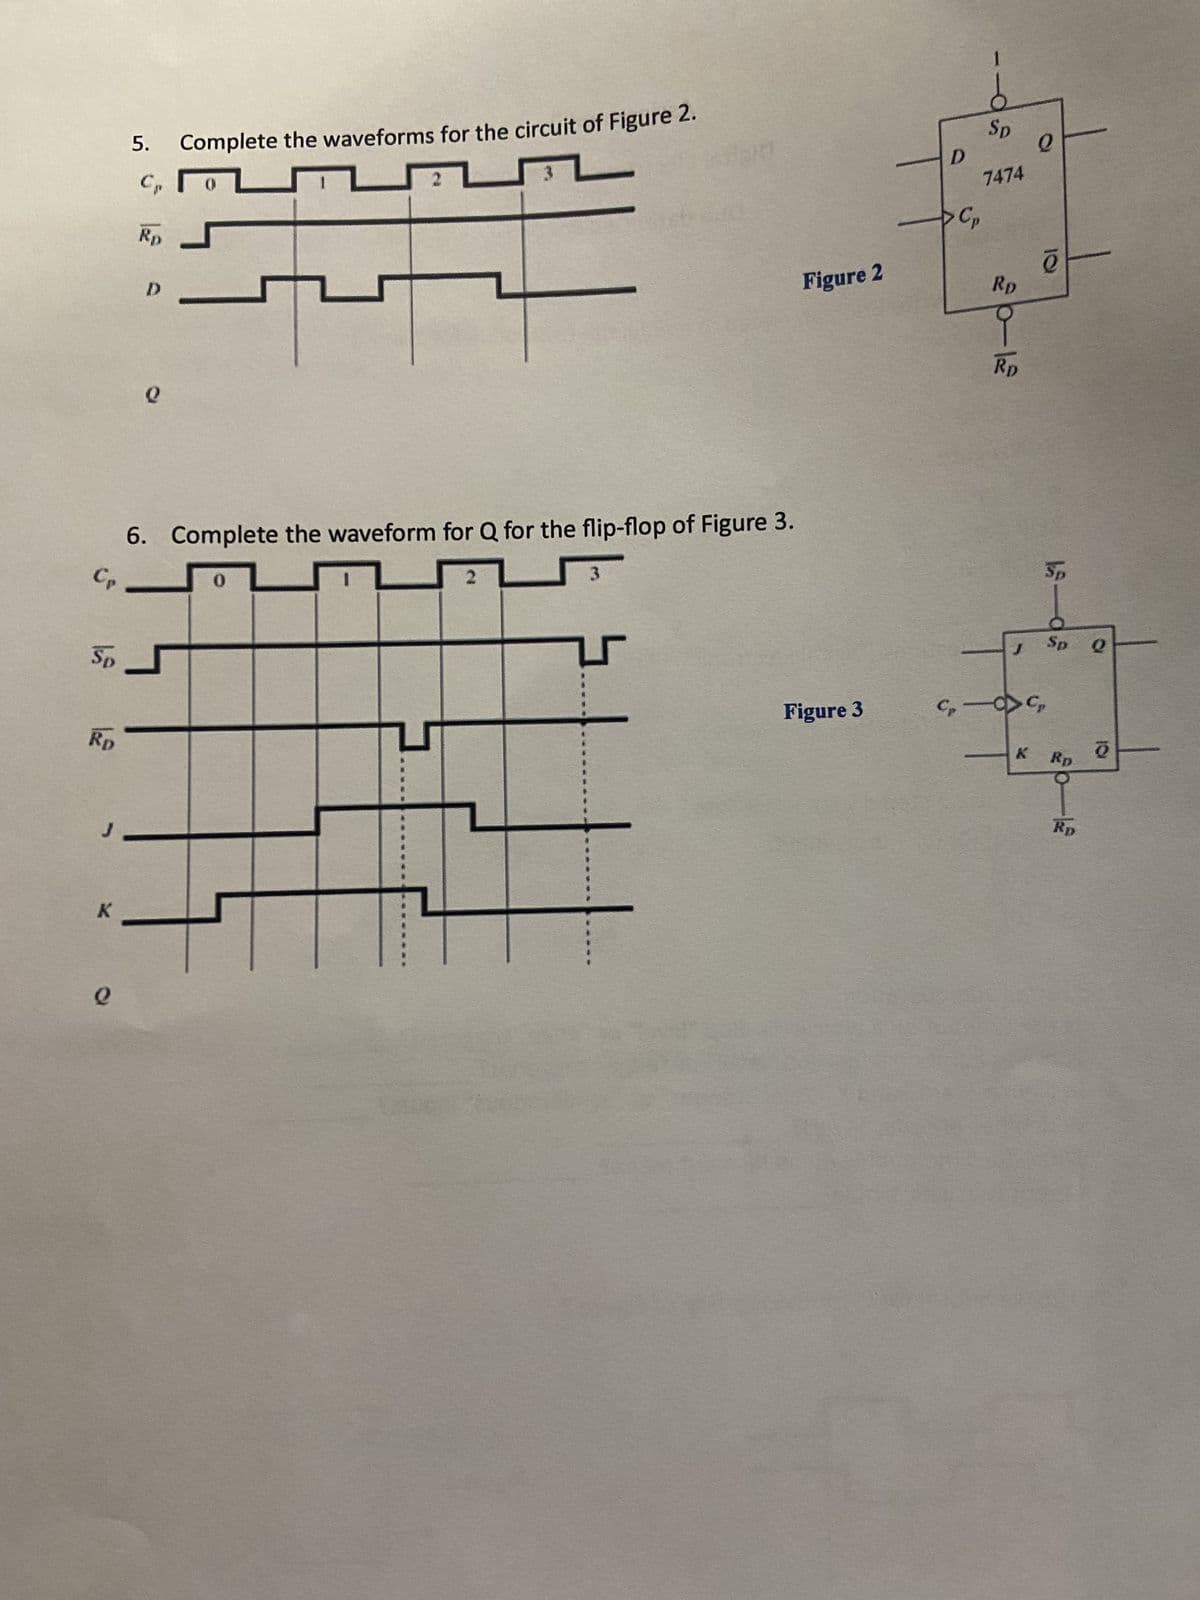 Rp
5. Complete the waveforms for the circuit of Figure 2.
Cp
Rp
#
Sp.
K
0
D
6. Complete the waveform for Q for the flip-flop of Figure 3.
Cp
0
0
14
0
310
3
Figure 2
Figure 3
D
- Cp
1
Sp
7474
30-13
RD
9
RD
J
Q
5645
e
Sp
Sp
Rp
Rp
Q
Q